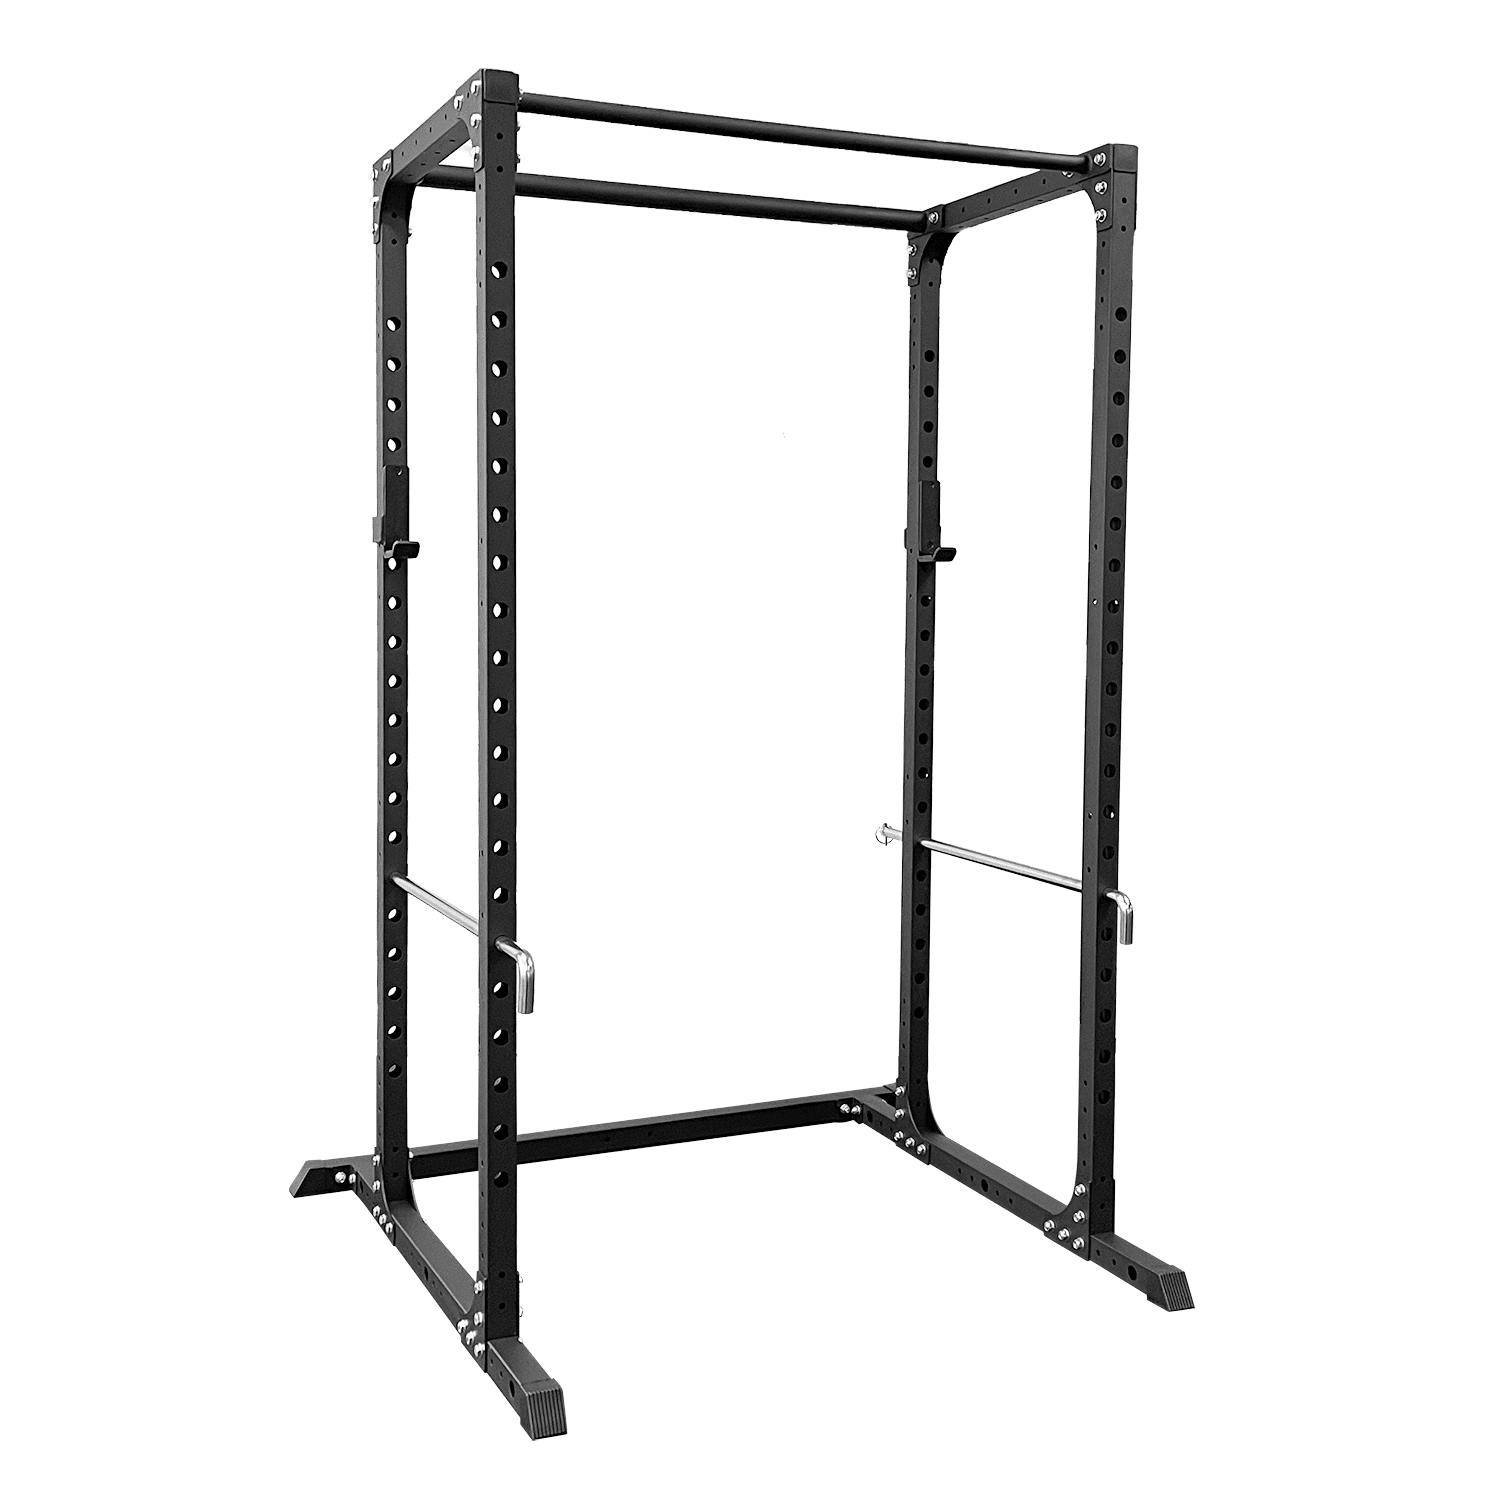 Nexo Power Rack 4x4 Power Cage - Workout Station Home Gym for Weightlifting  Powerlifting and Strength Training with J Hooks and Spotter Pins